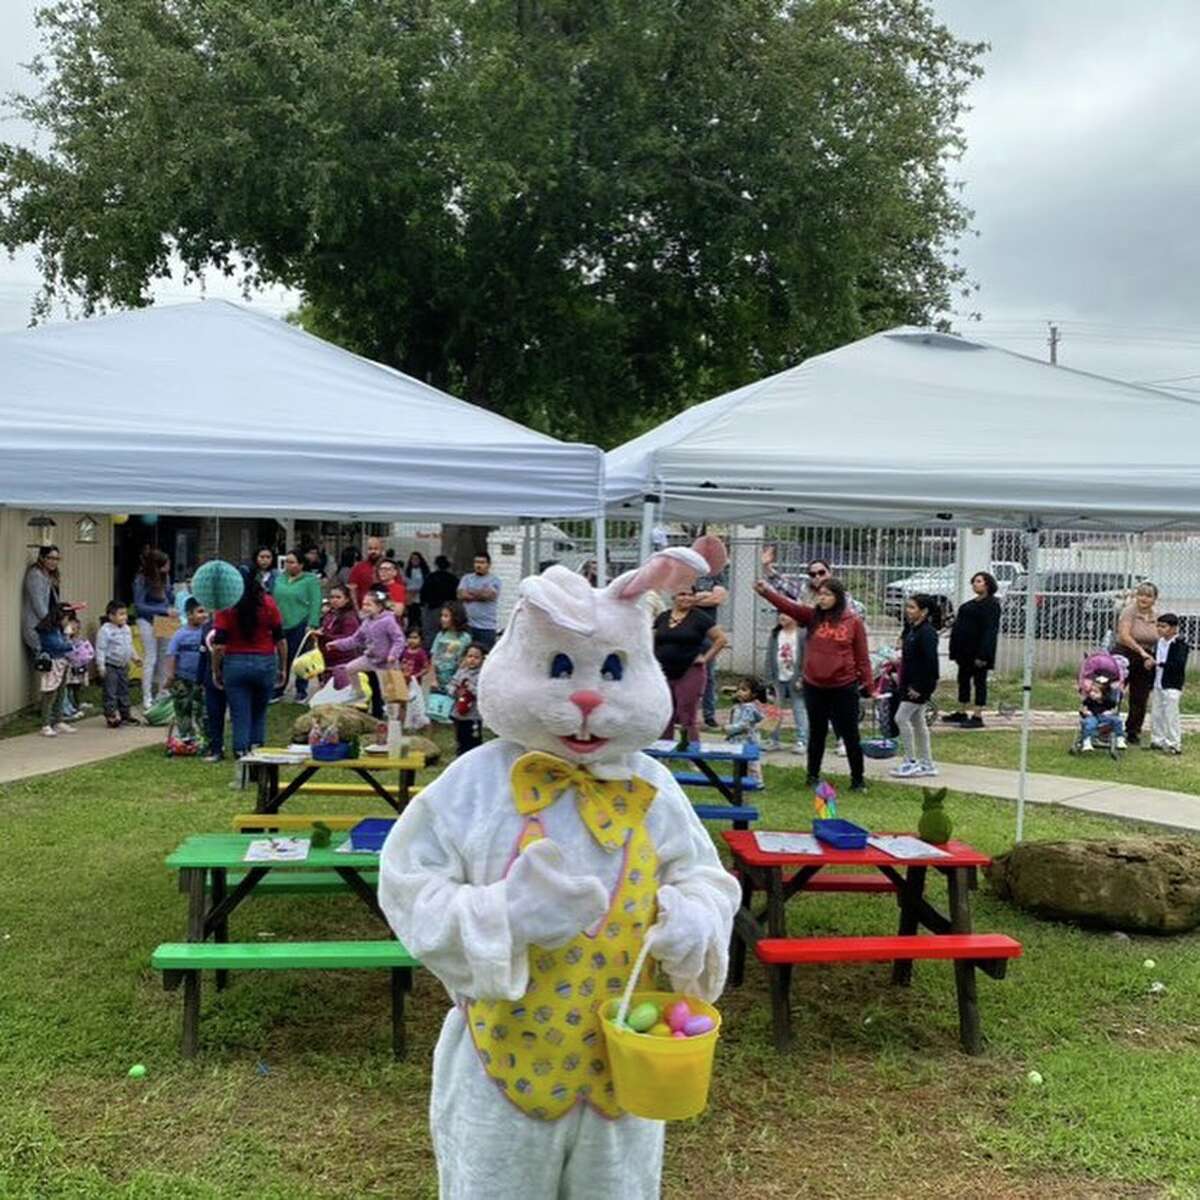 Laredo Animal Protective Society hosted its 4th Annual Easter Egg Hunt on Sunday, April 9 at 2500 Gonzalez St.